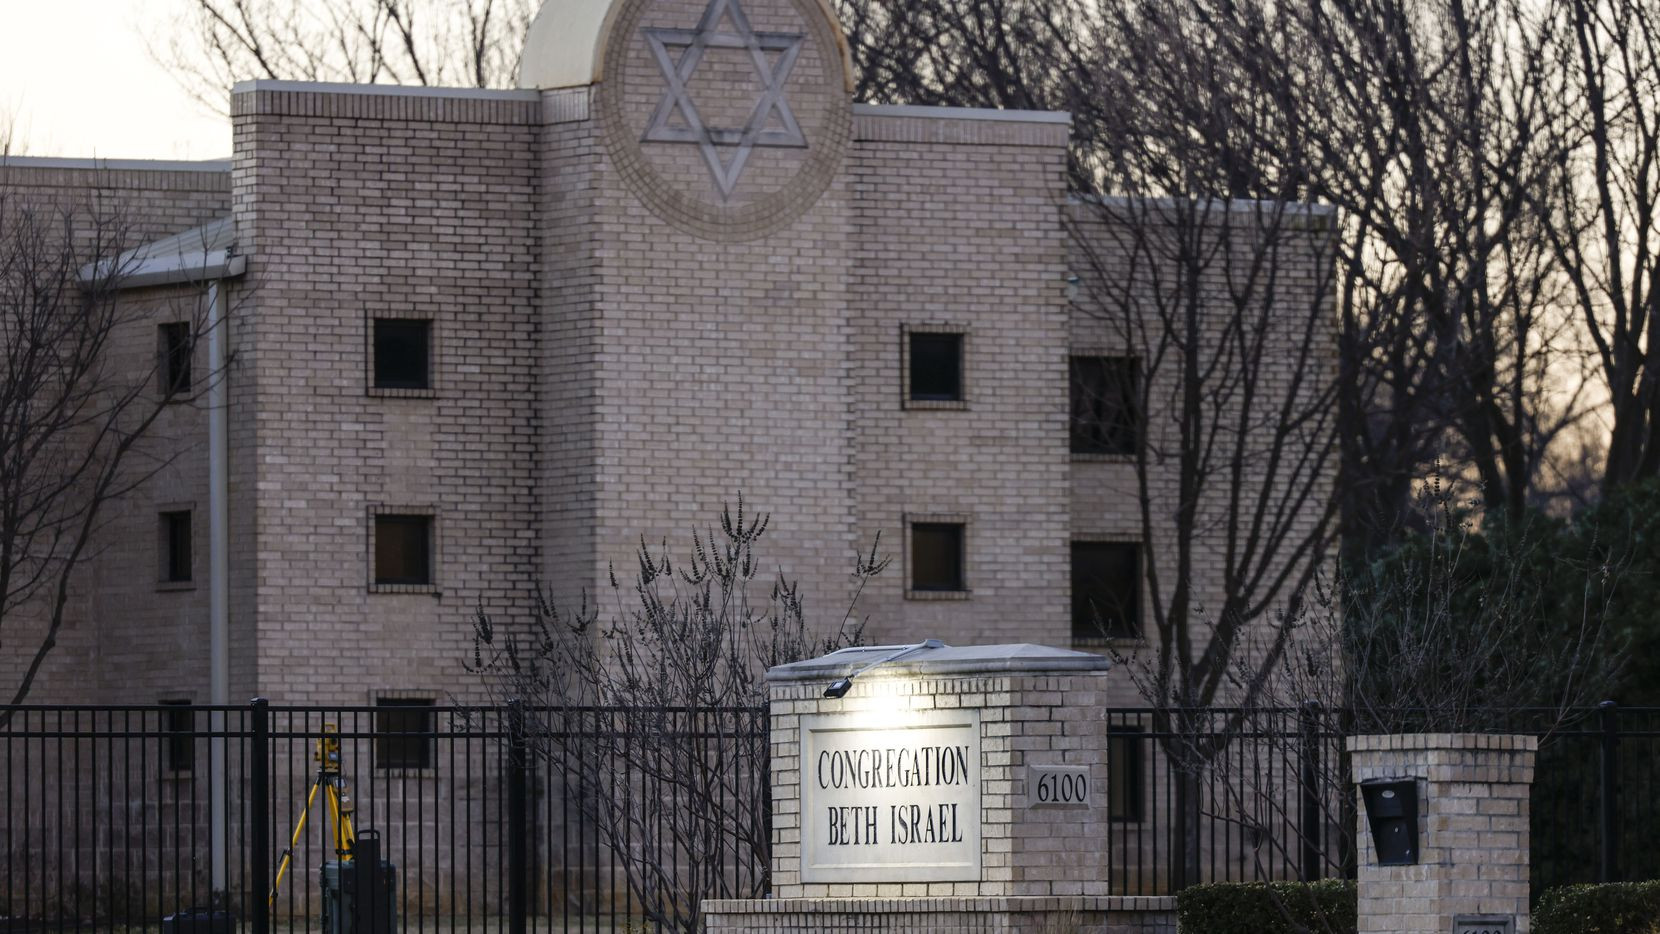 A picture of a synagogue with trees to the right of it.